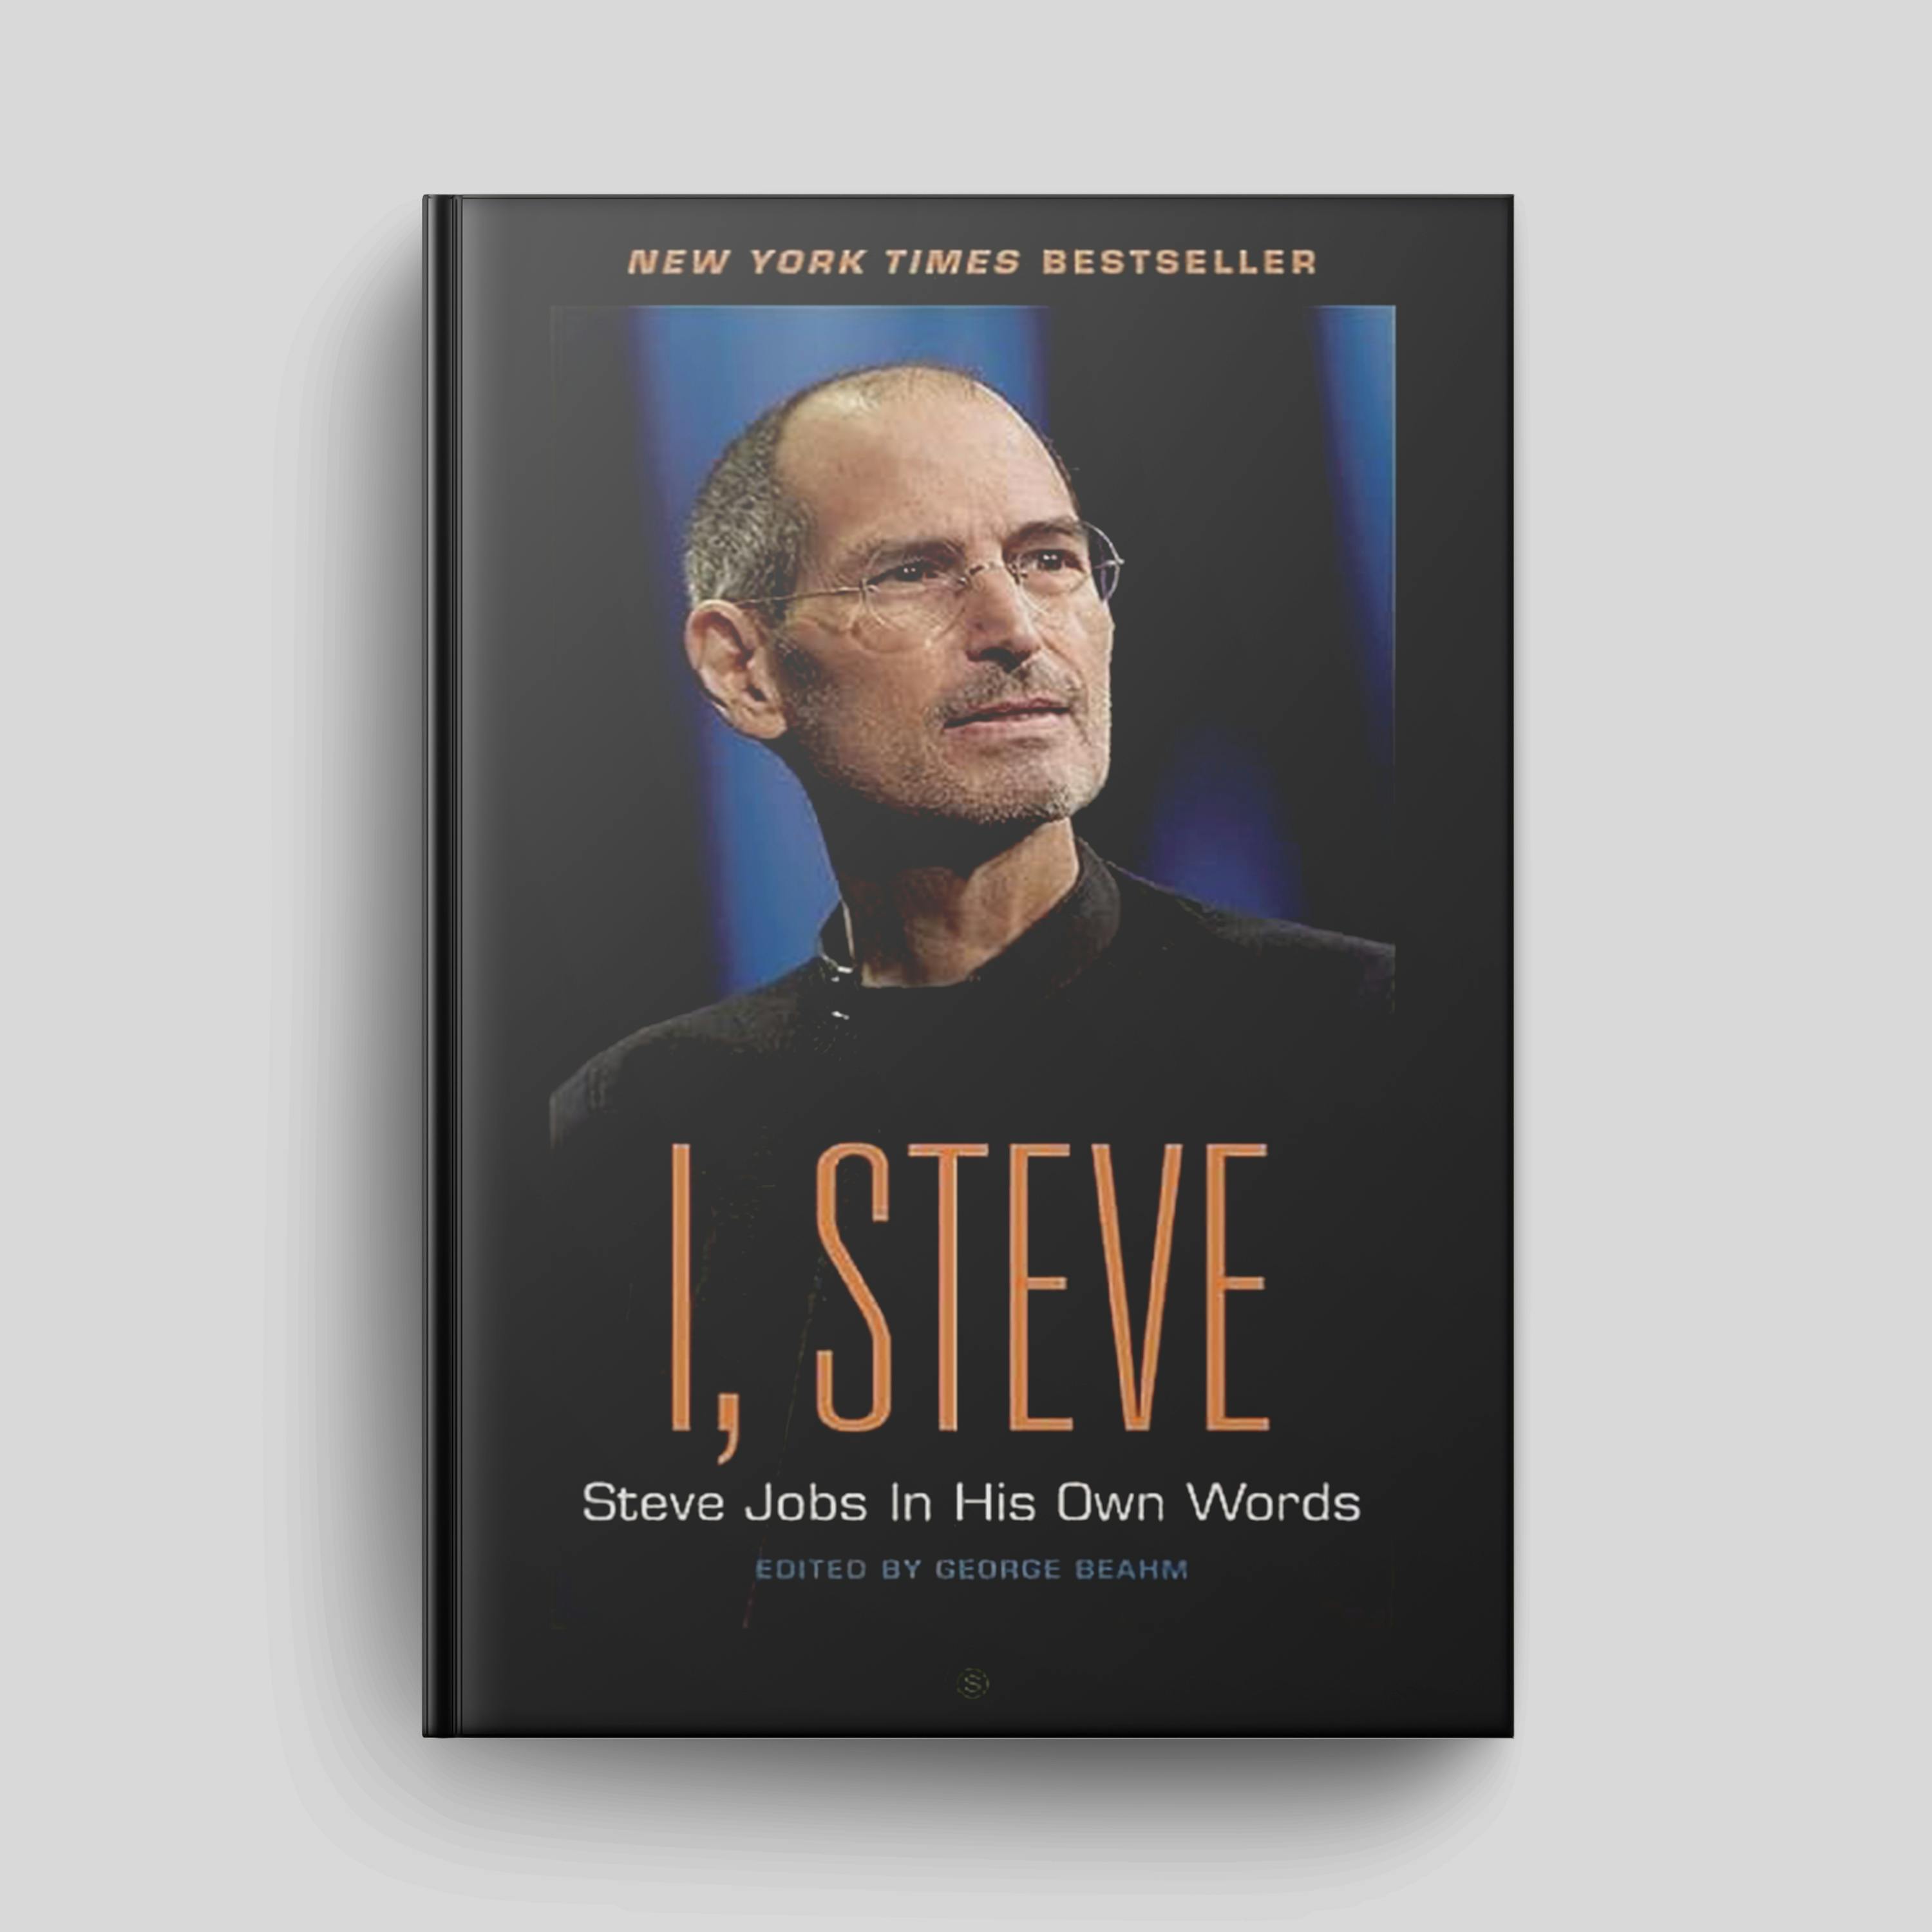 Trailer - Book: "I, Steve: Steve Jobs in his Own Words" by George Beahm | Episode #172